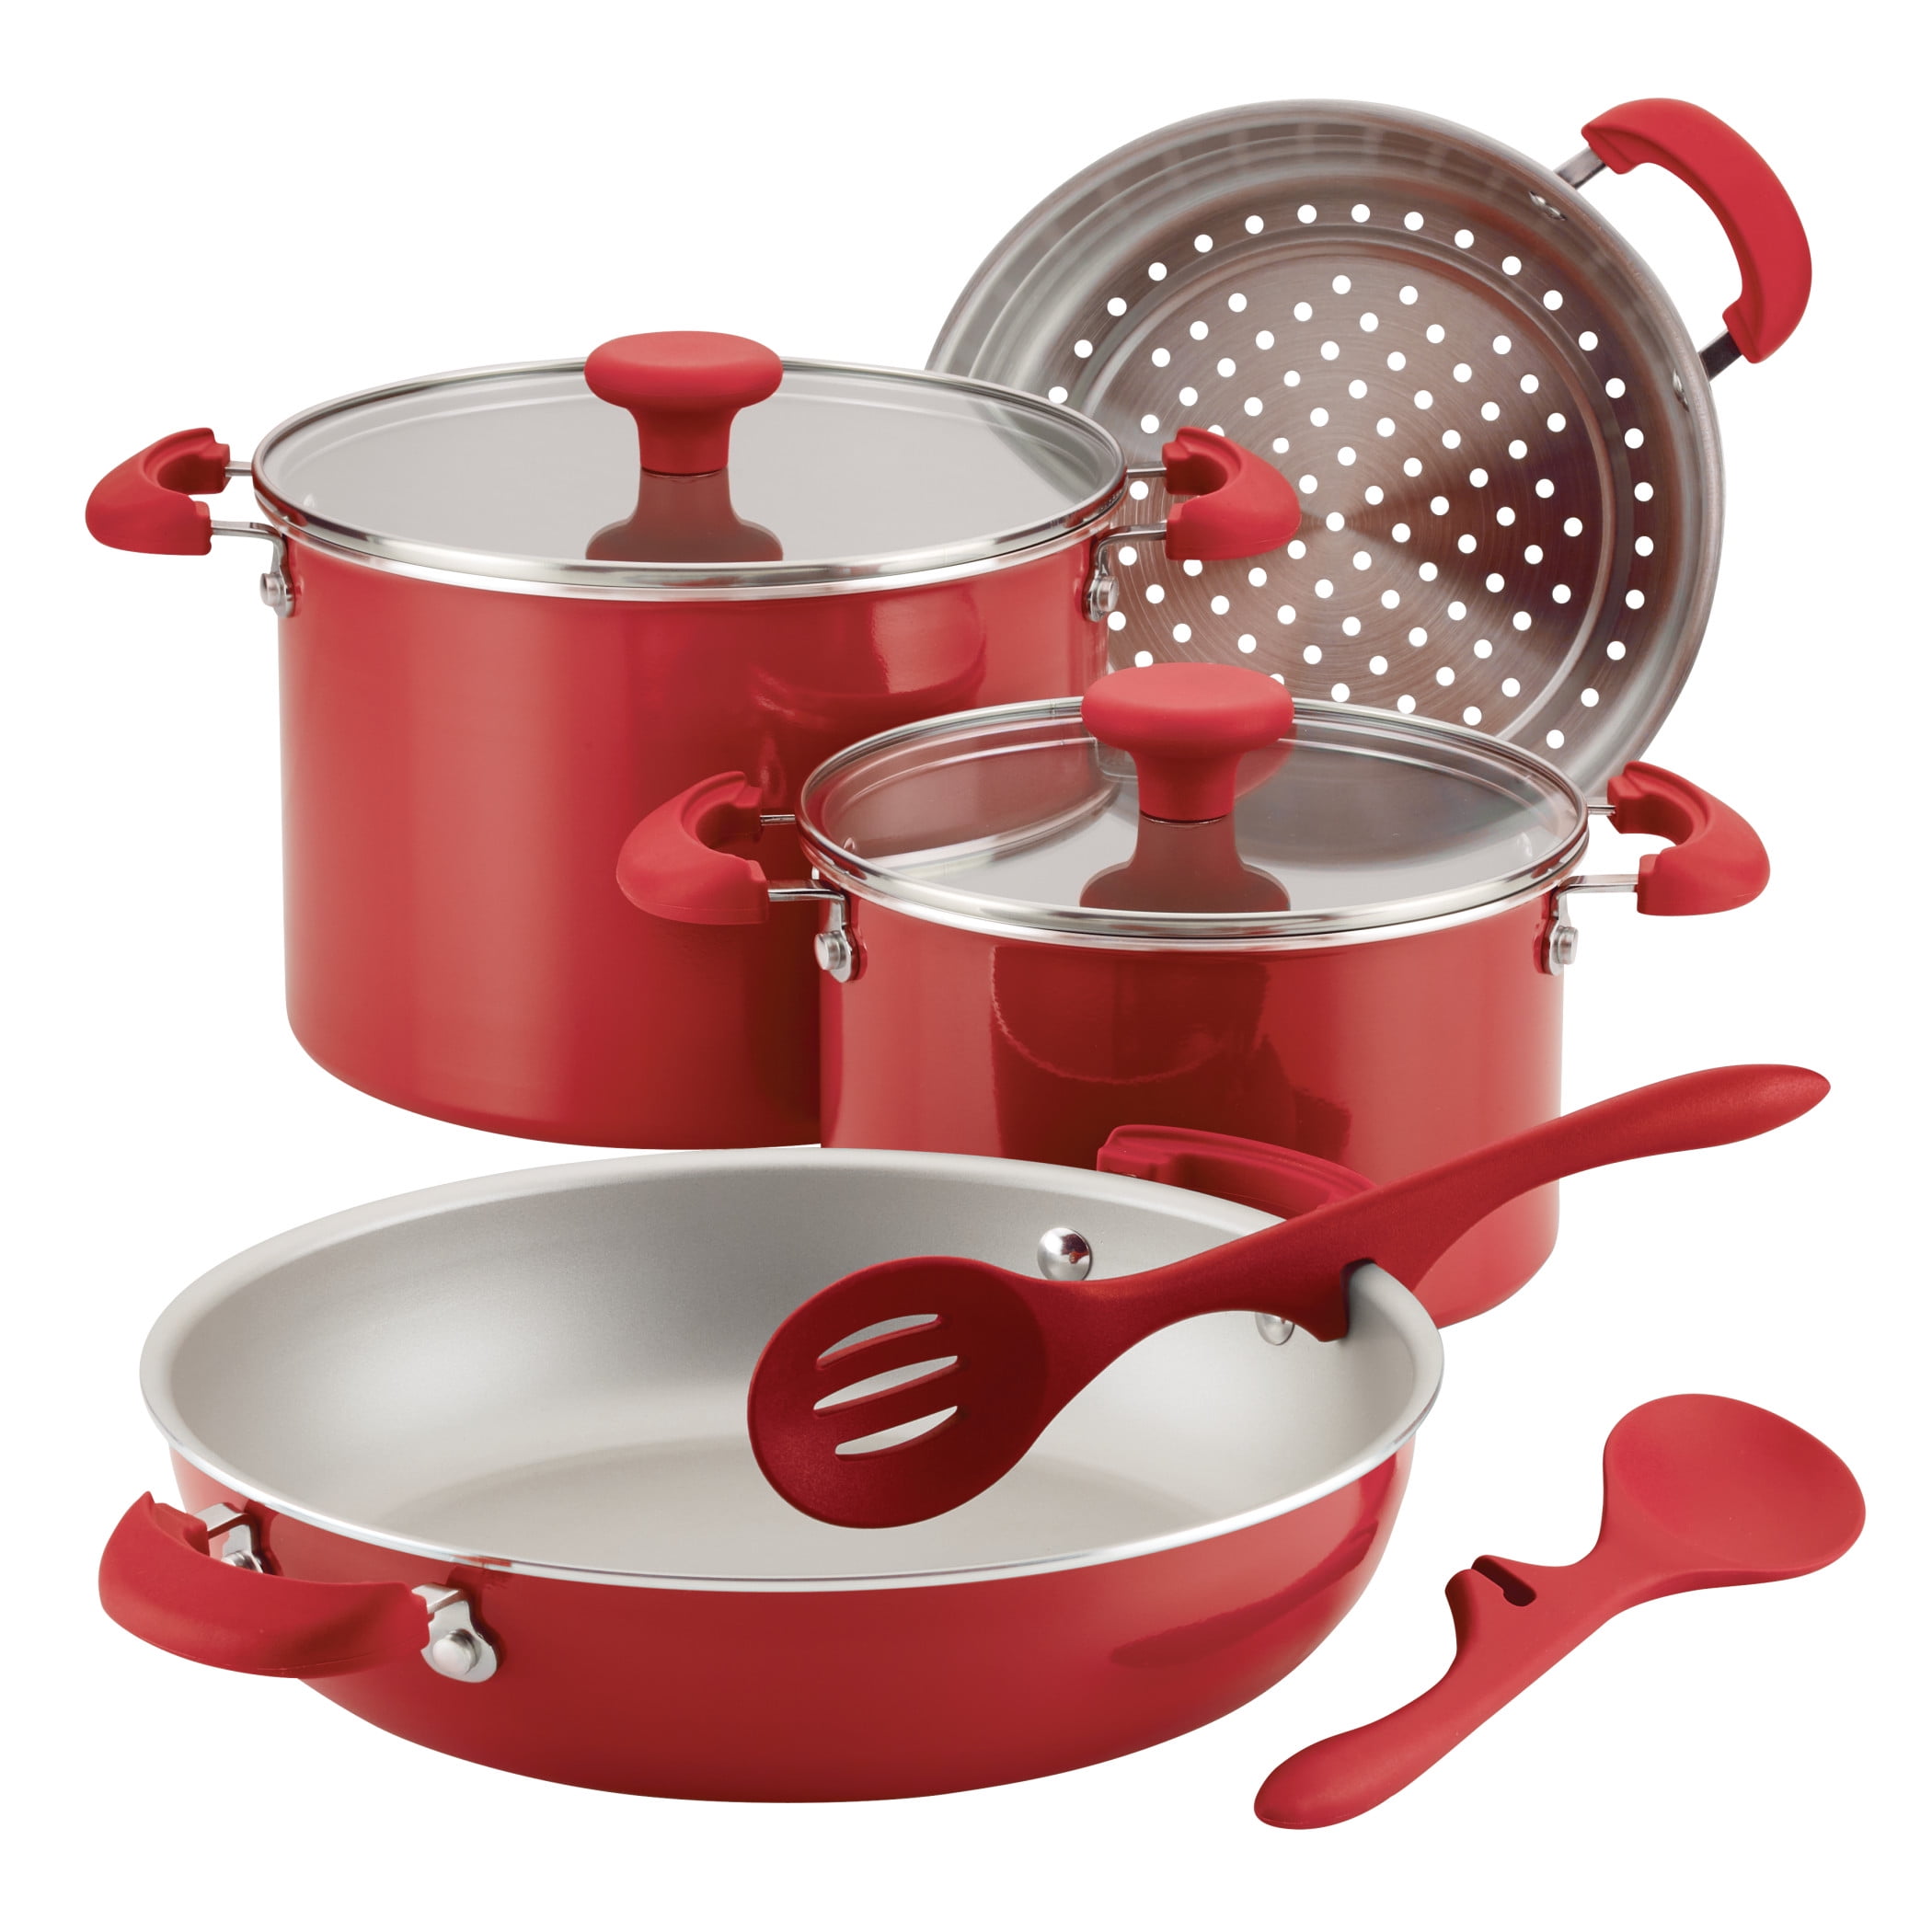 rachael-ray-8-piece-get-cooking-stackable-nonstick-cookware-set-red